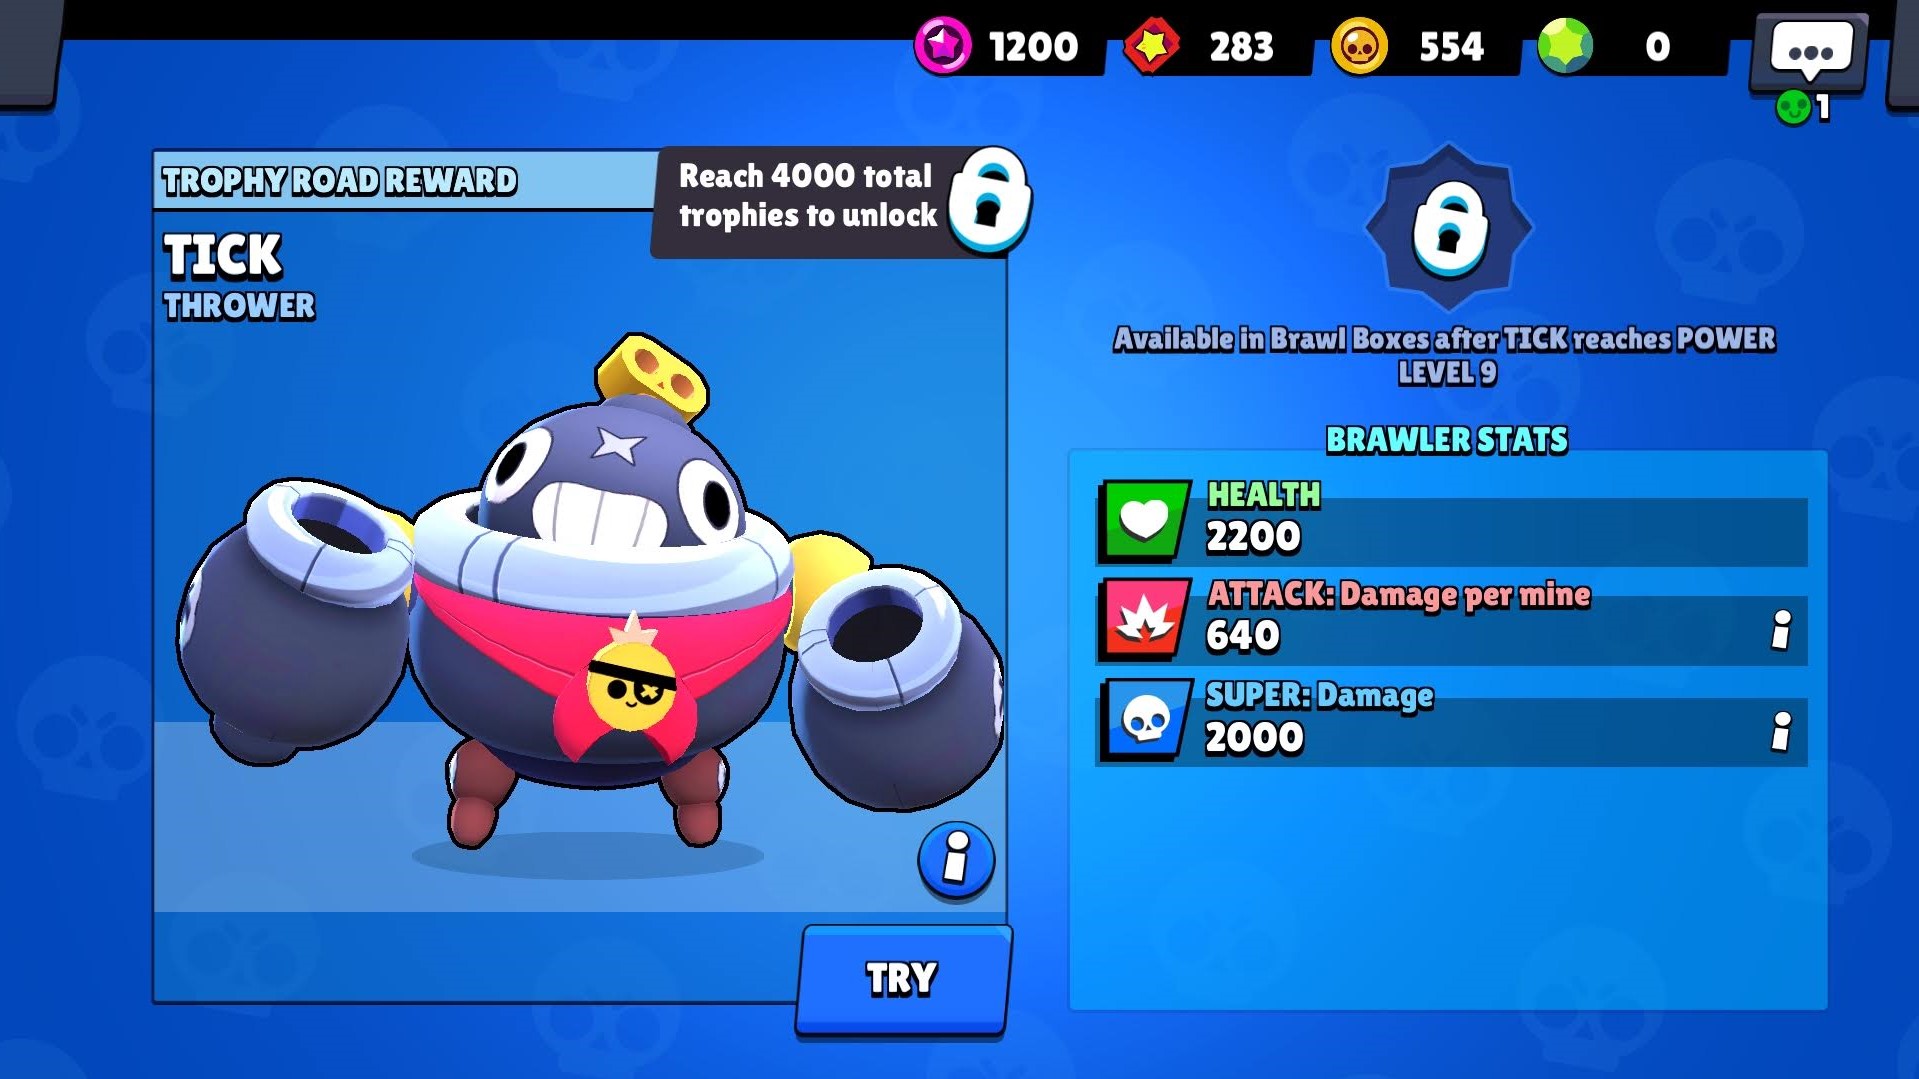 Brawl Stars Updates All Updates And New Brawlers In One Place - brawl stars trophy update